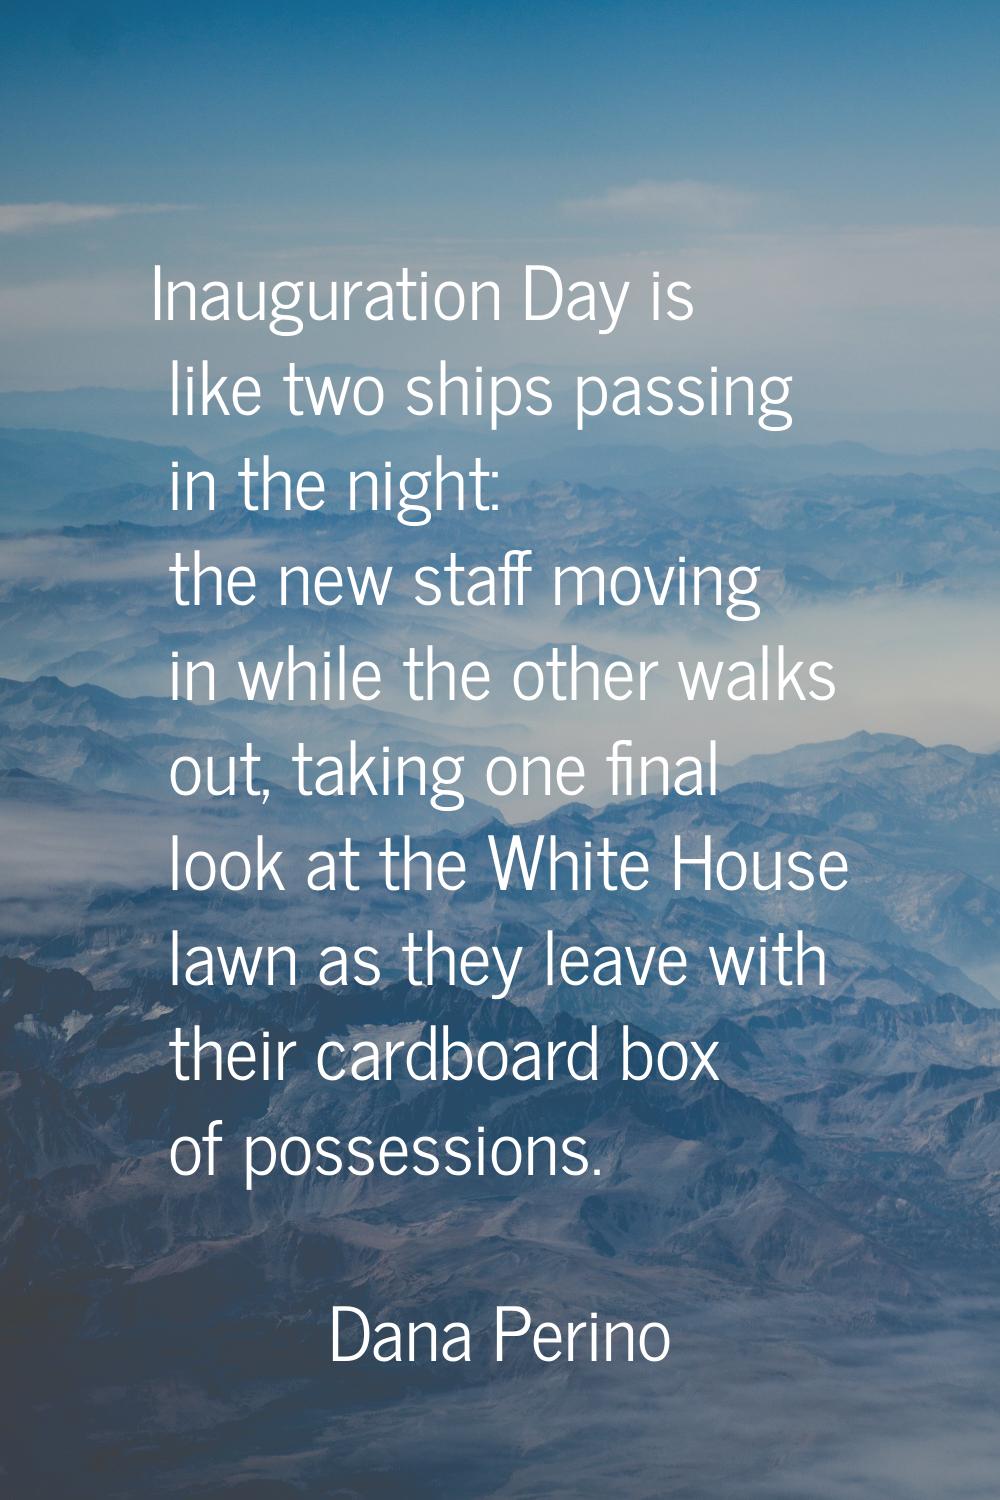 Inauguration Day is like two ships passing in the night: the new staff moving in while the other wa